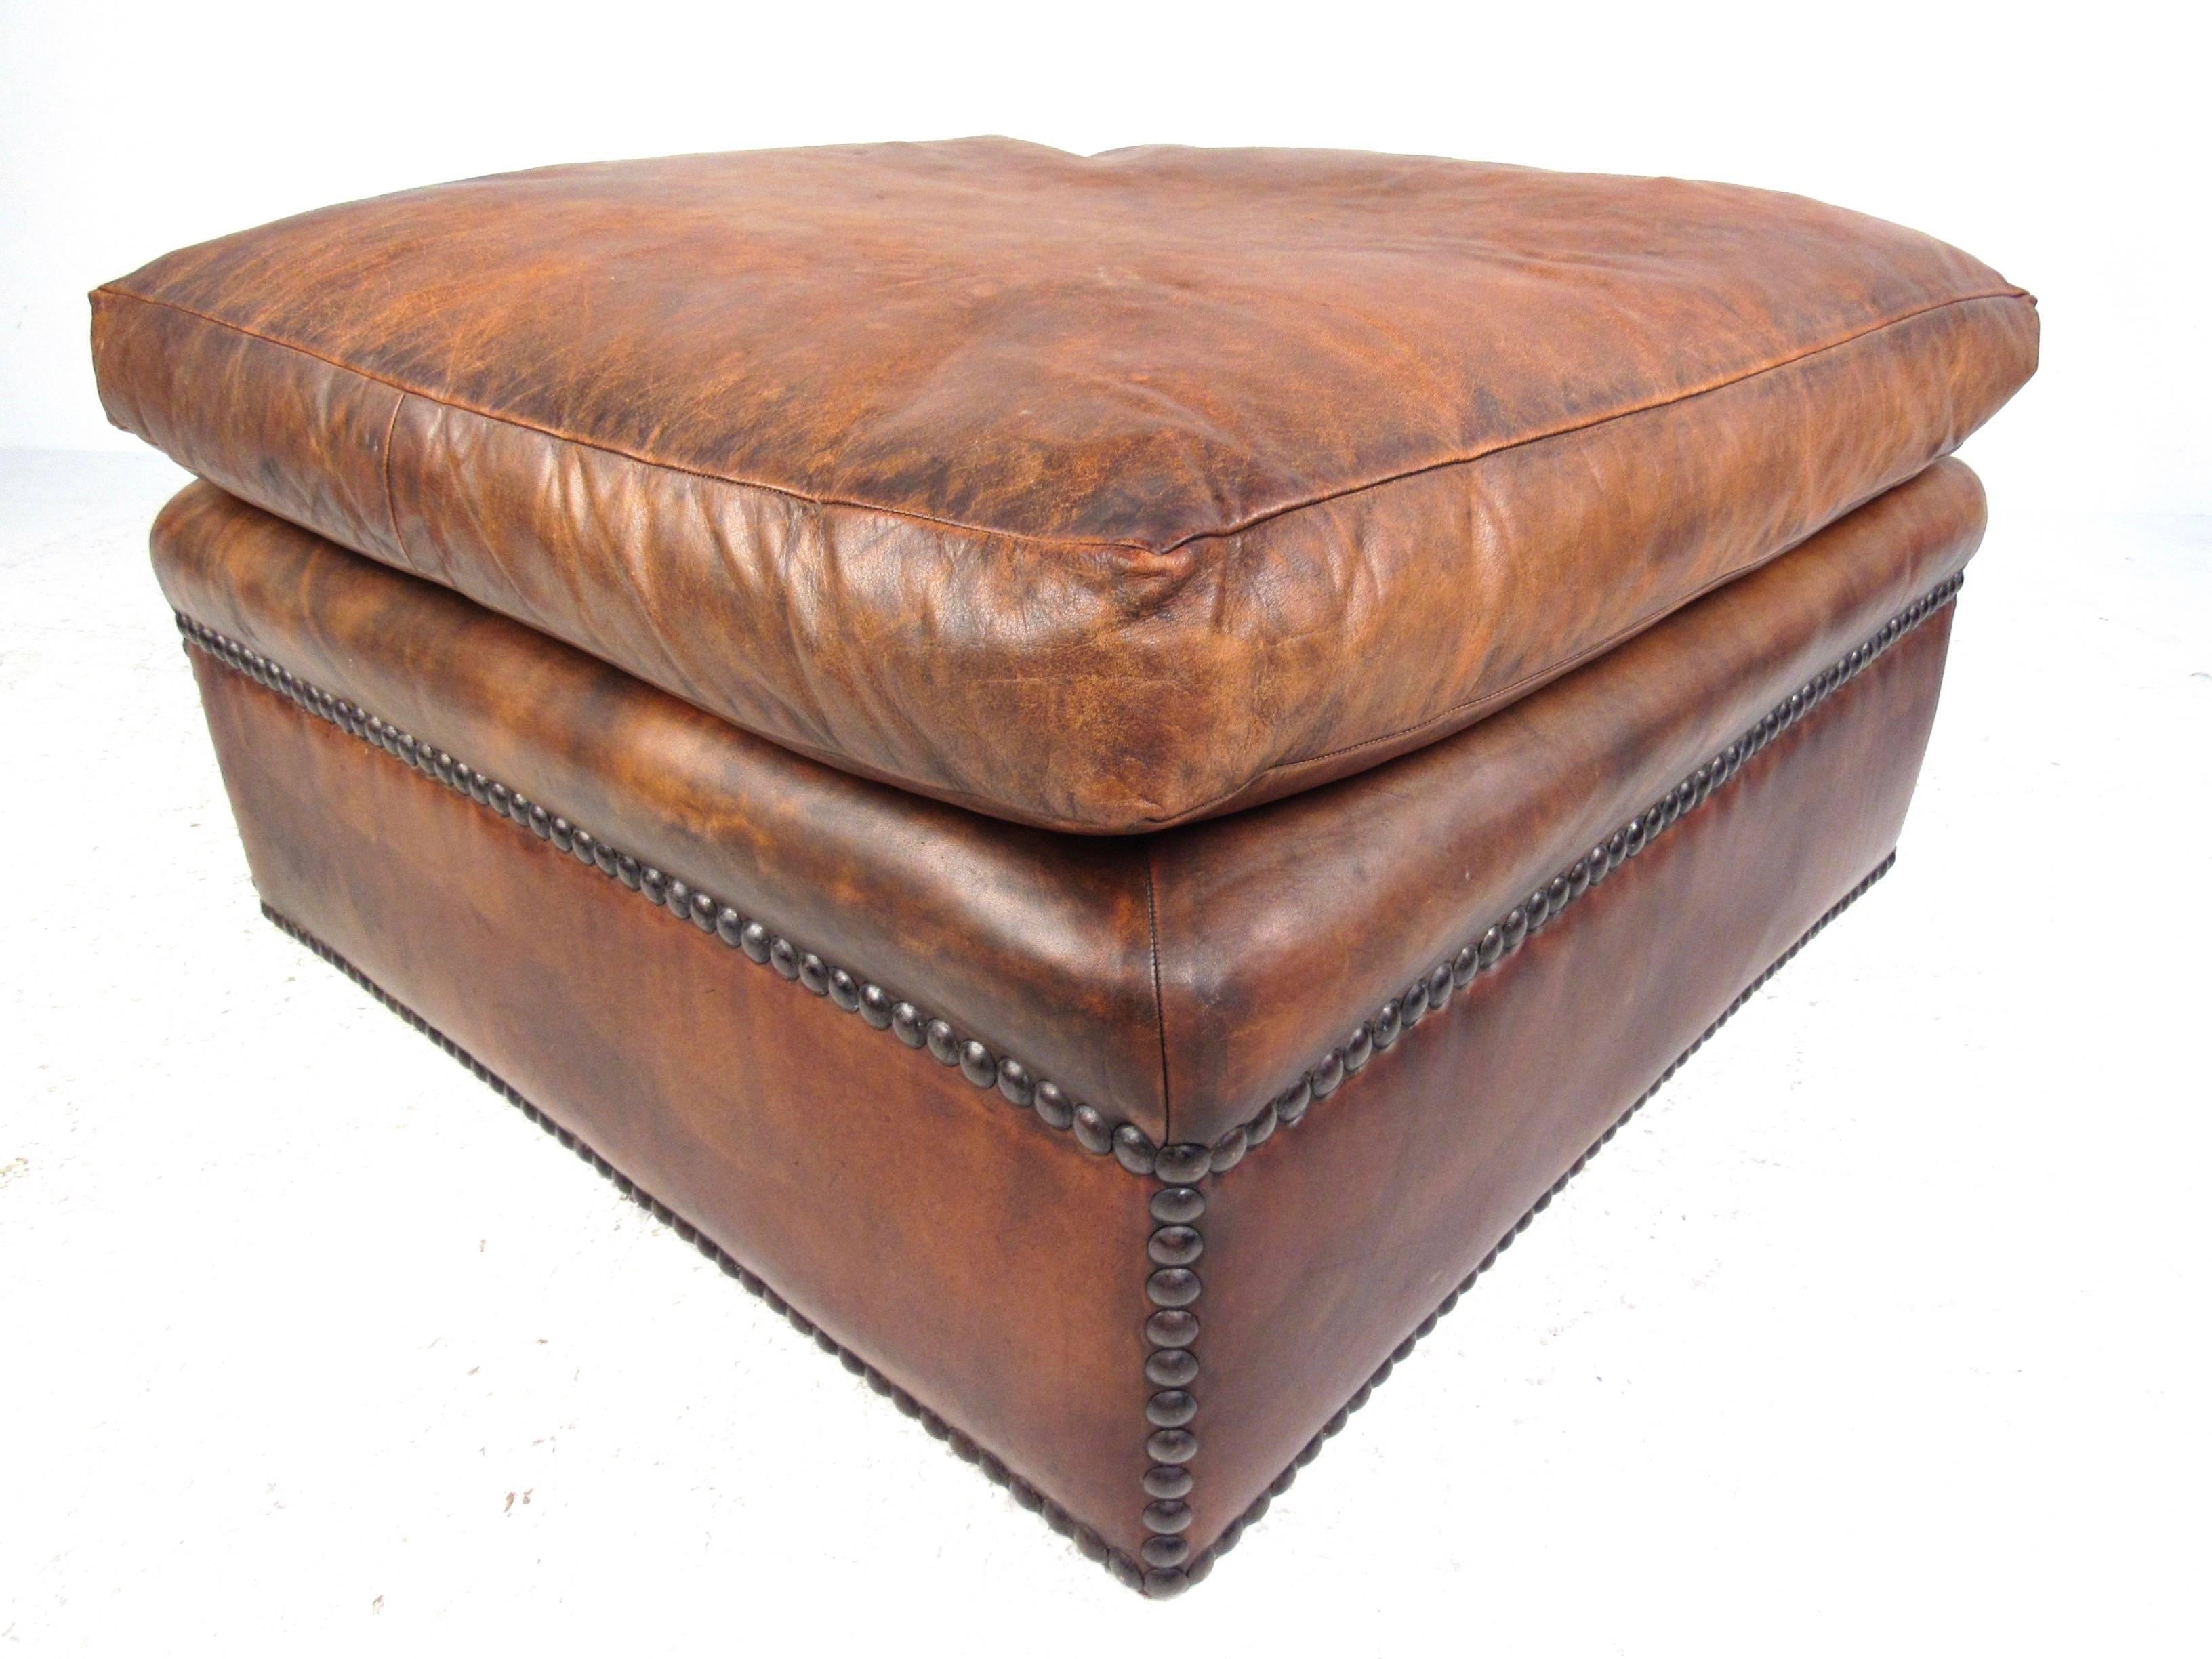 This wonderful ottoman features rich leather upholstery with brass studded trim. Wonderfully aged with light patina to studs and leather, this large ottoman is a comfortable and stylish addition to any seating arrangement. Please confirm item